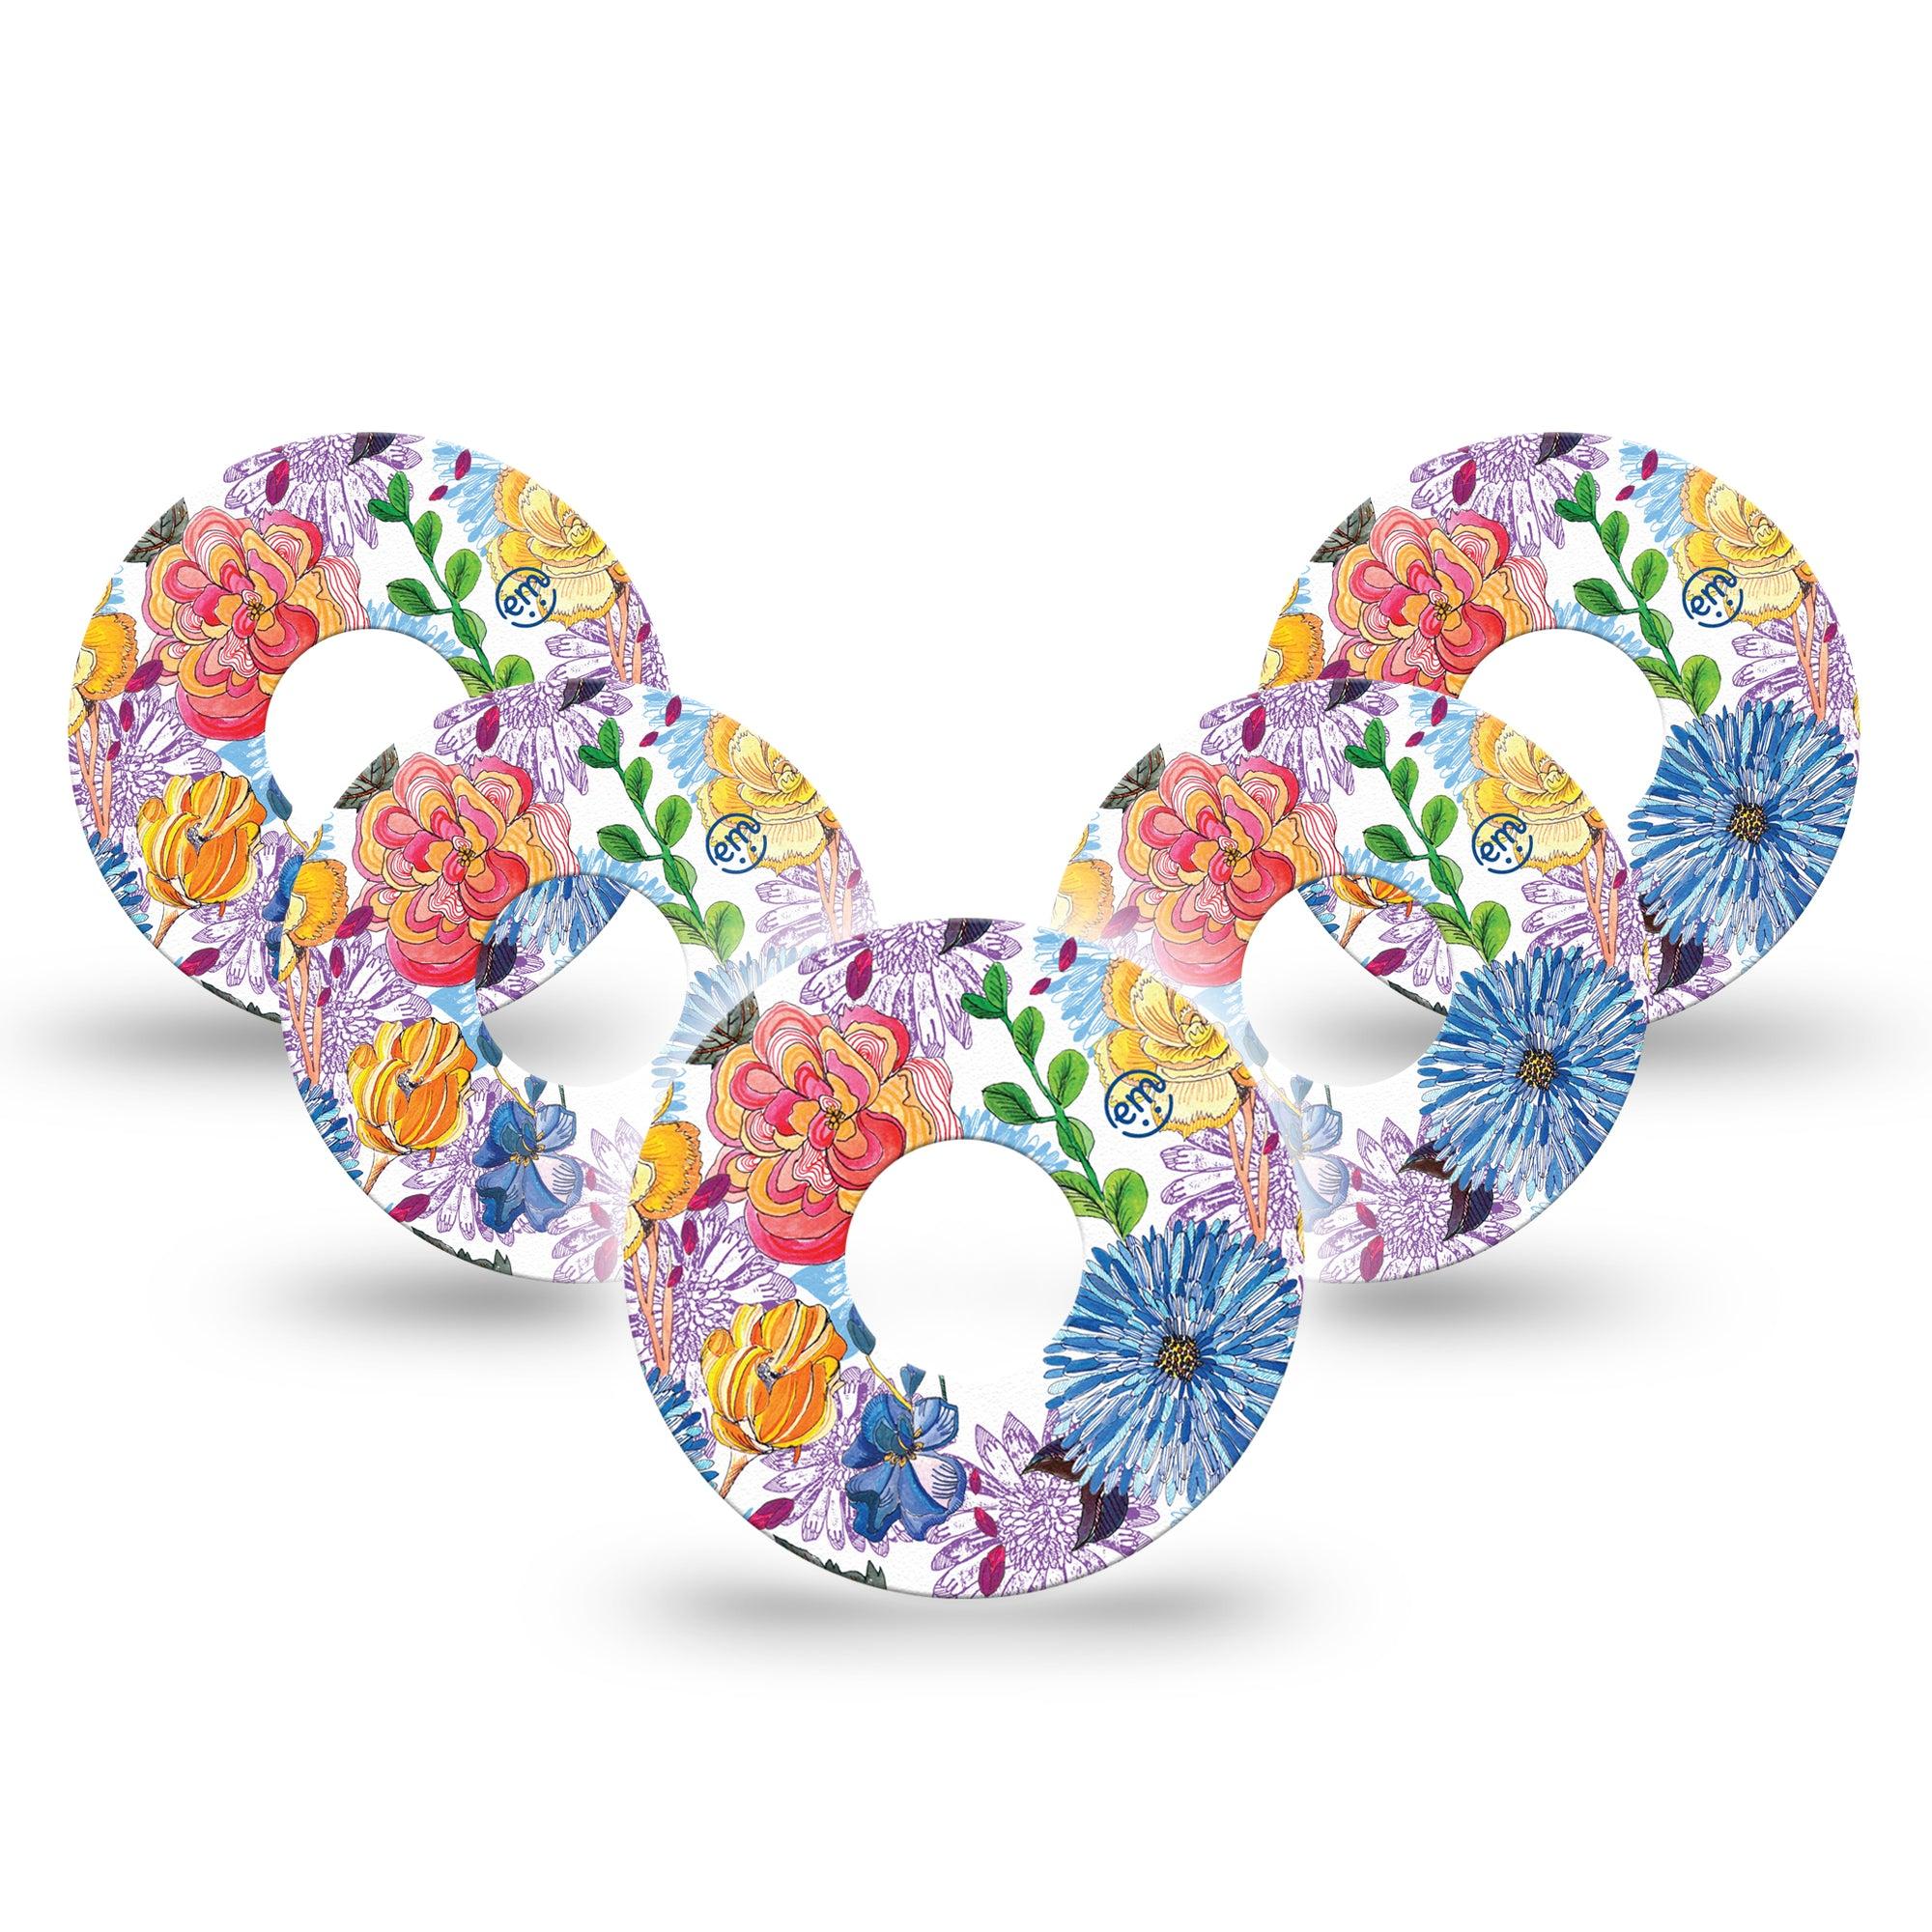 Stylised Floral Libre 3 Tape, 5-Pack, Floral Fantasy Inspired, CGM Overlay Patch Design